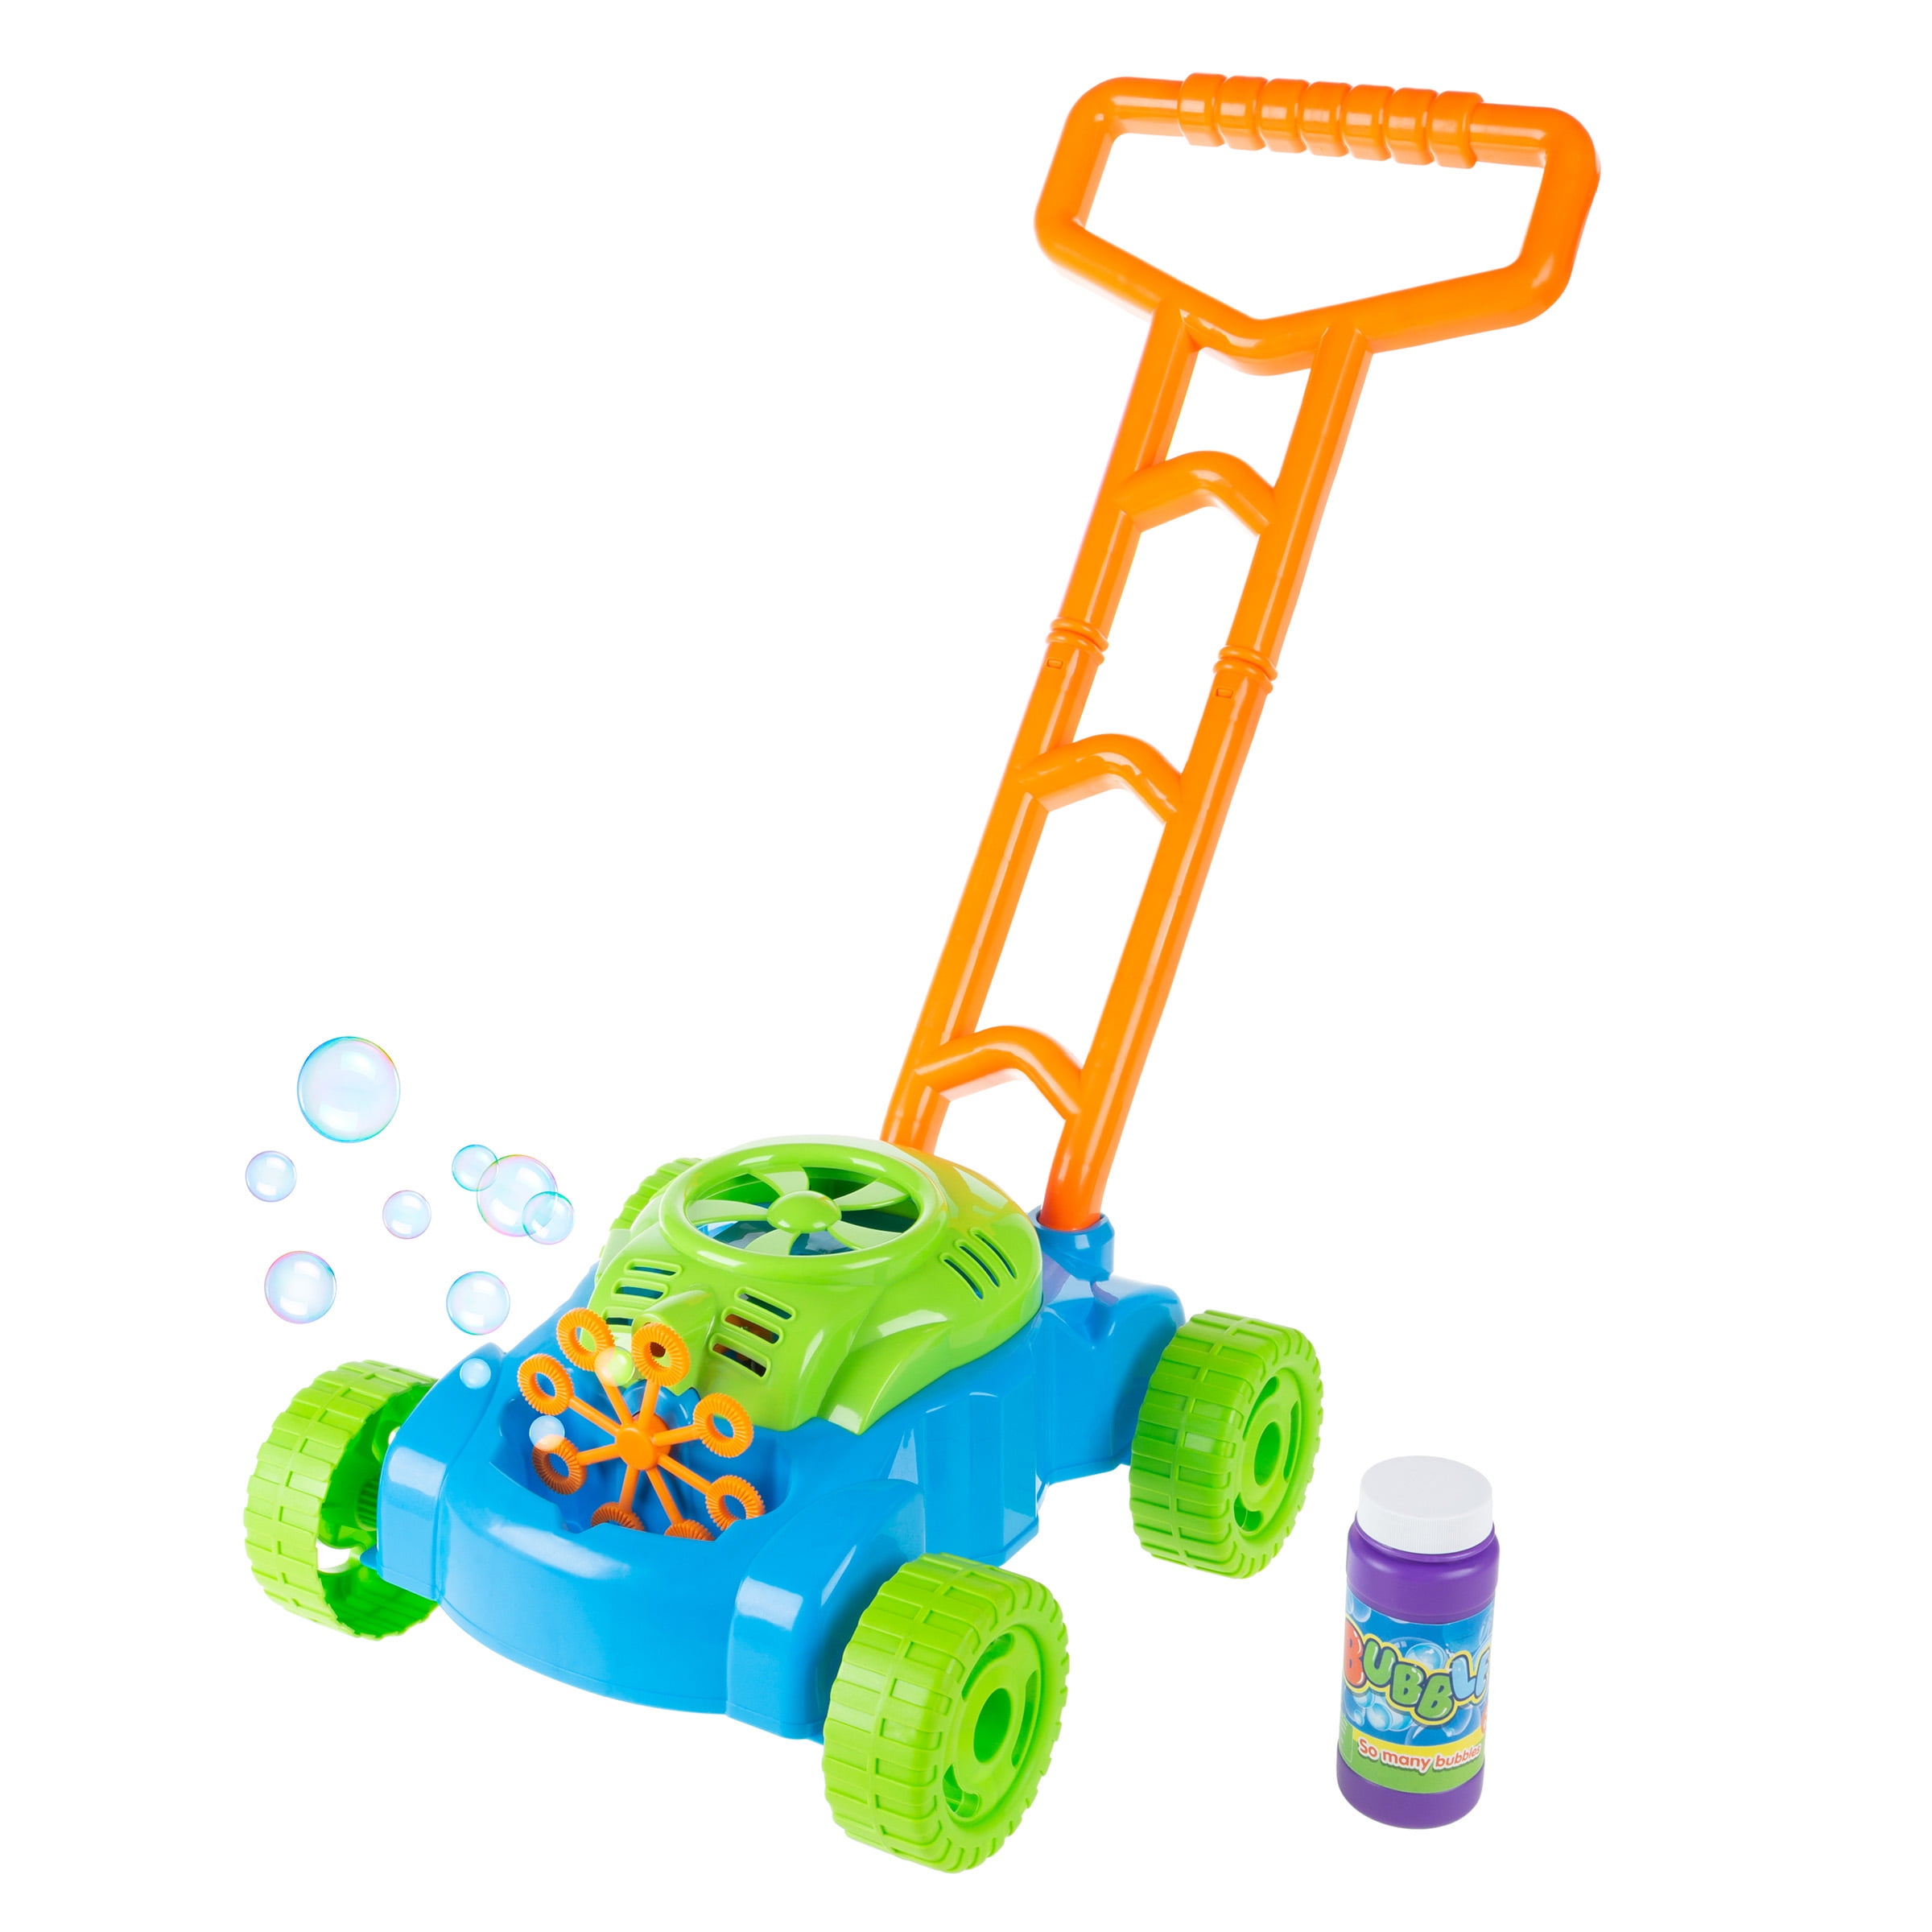 Bubble Lawn Mower- Toy Push Lawnmower Bubble Blower Machine, Walk Behind  Outdoor Activity for Toddlers, Boys and Girls by Hey! Play! - Walmart.com